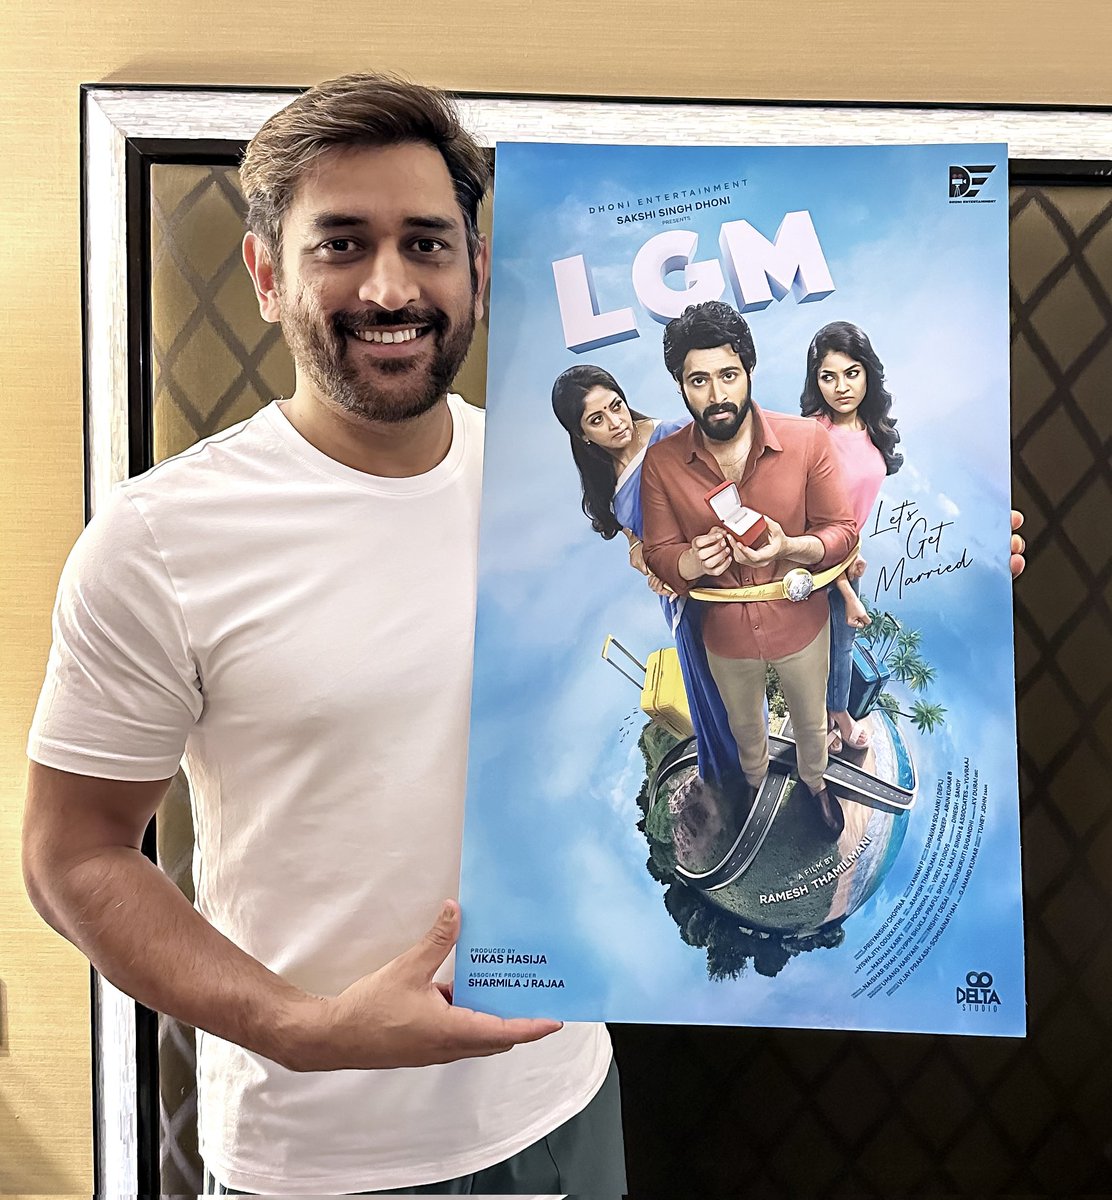 MS Dhoni with the first look poster of LGM.

This is the first film produced by Dhoni Entertainment.